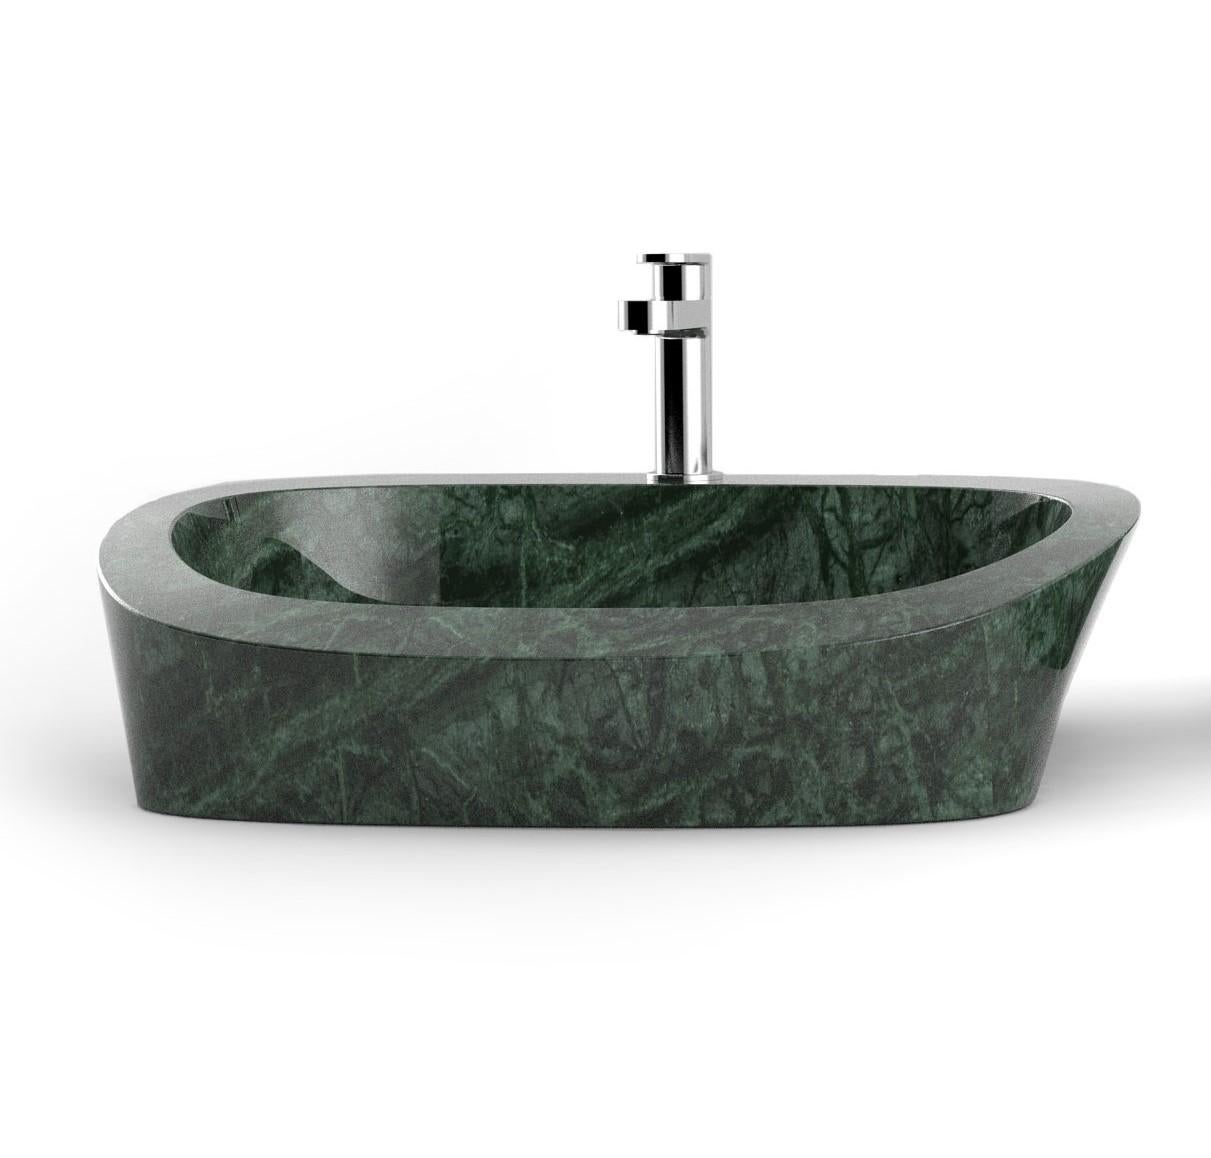 Opera Romeo washbasin by Marmi Serafini
Materials: Verde Guatemala marble.
Dimensions: D 48 x W 58 x H 17 cm
Available in other marbles.
Tap not included.

One of the most beloved operas set in stone and following the storylines of the most famous